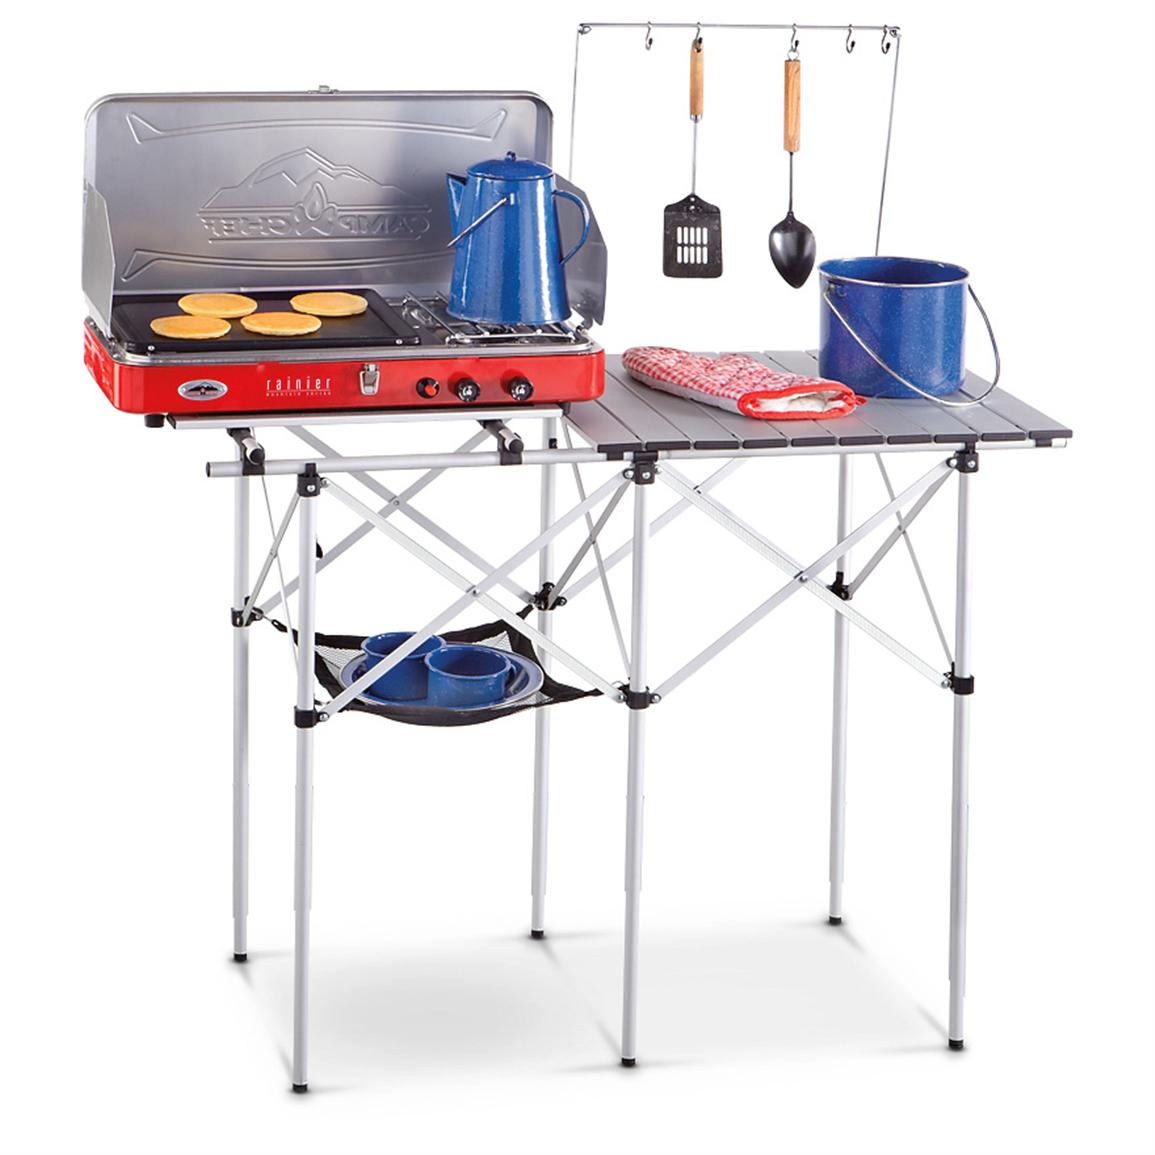 Guide Gear Compact Camp Kitchen 581525 Tables At Sportsmans Guide